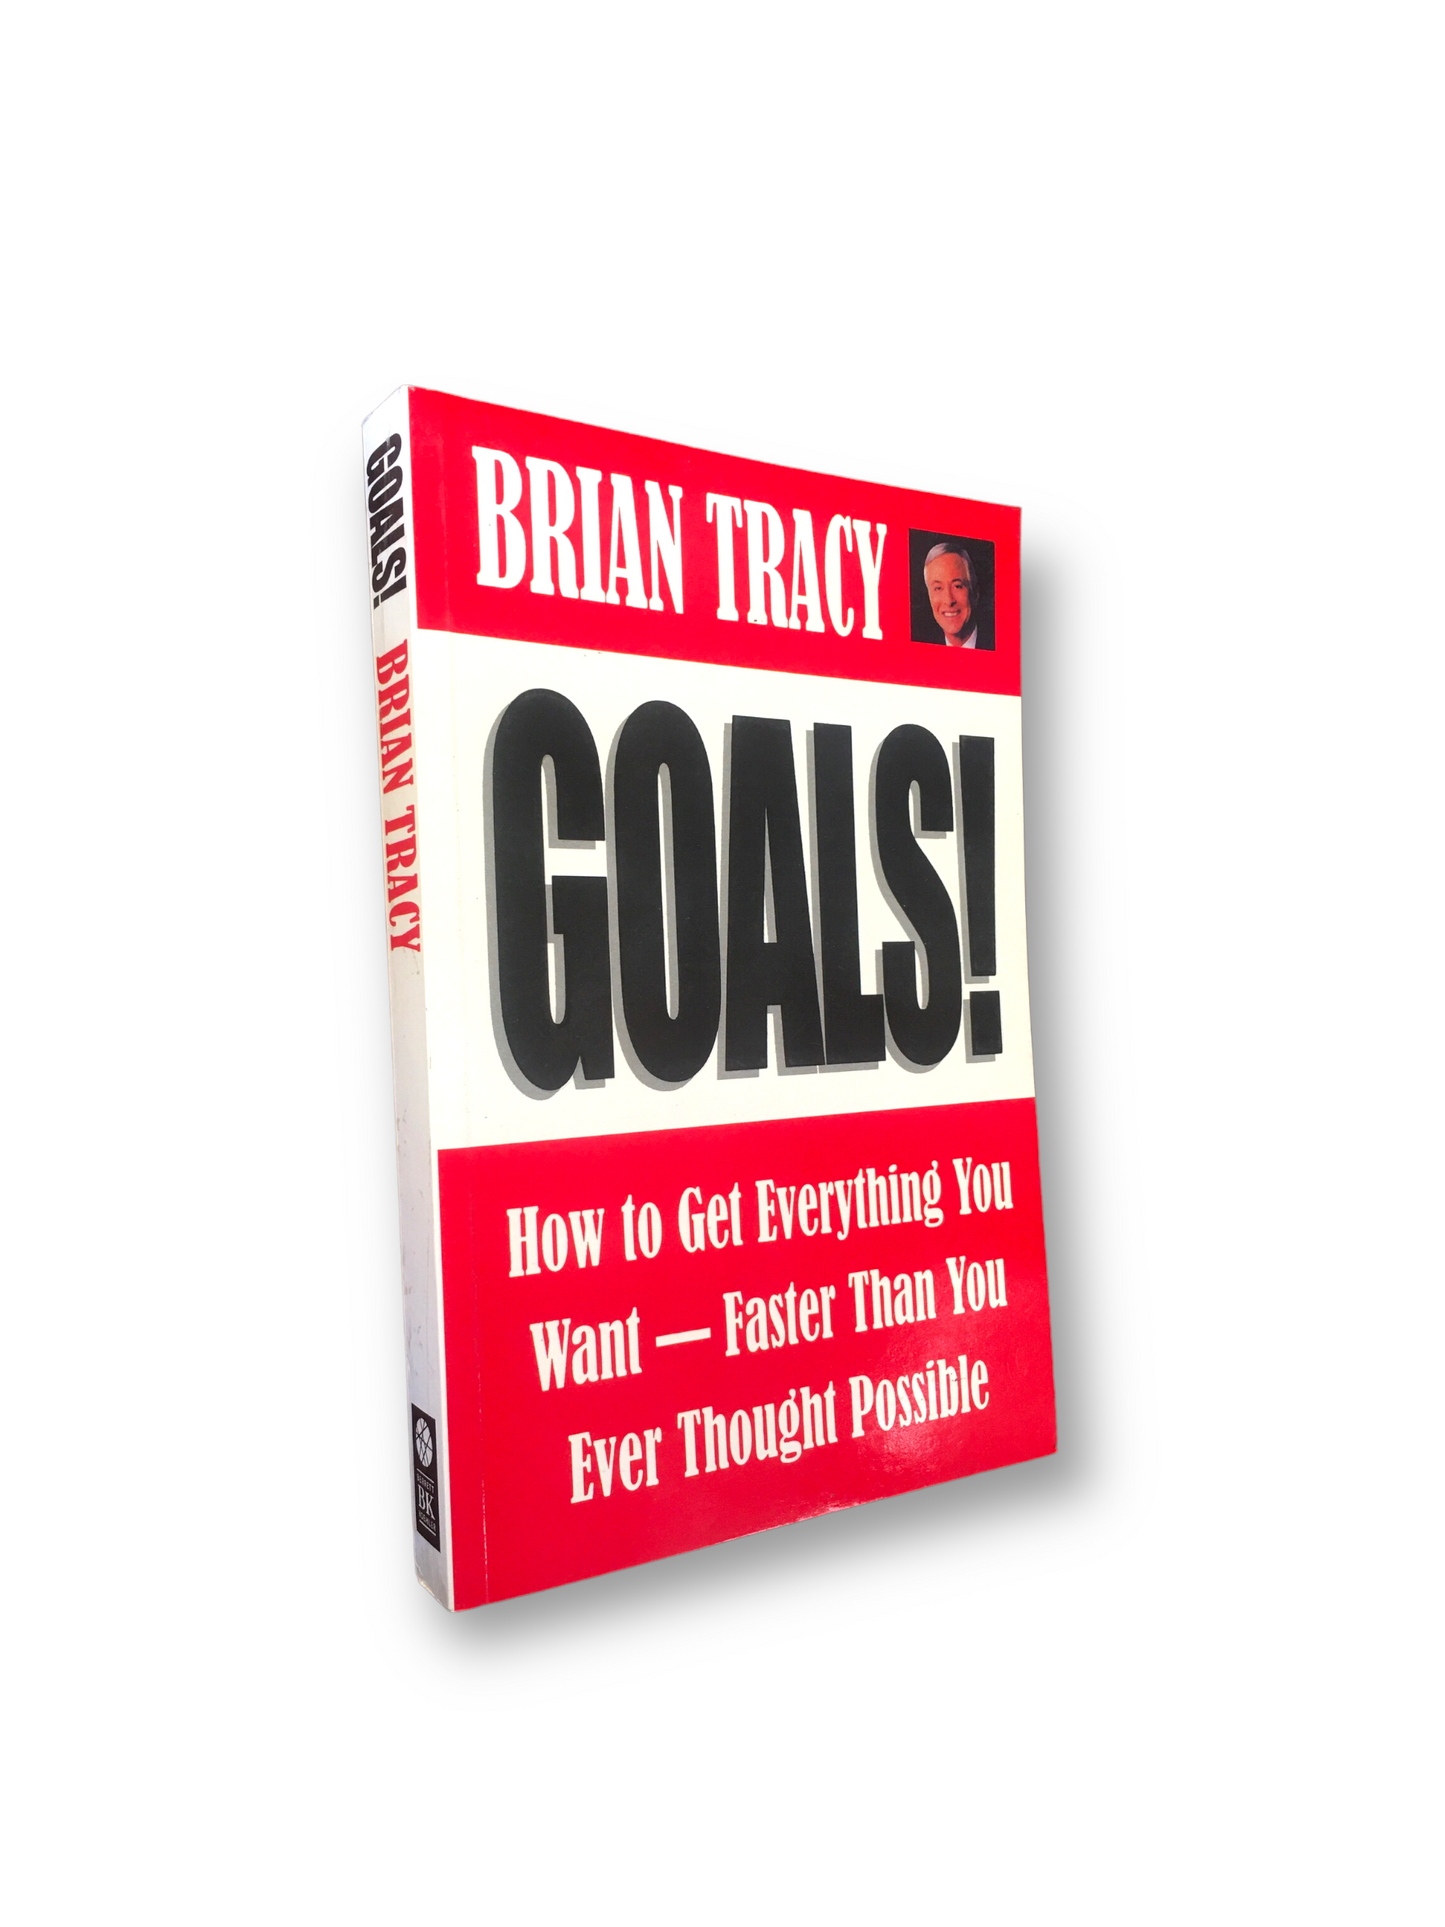 GOALS! by Brian Tracy